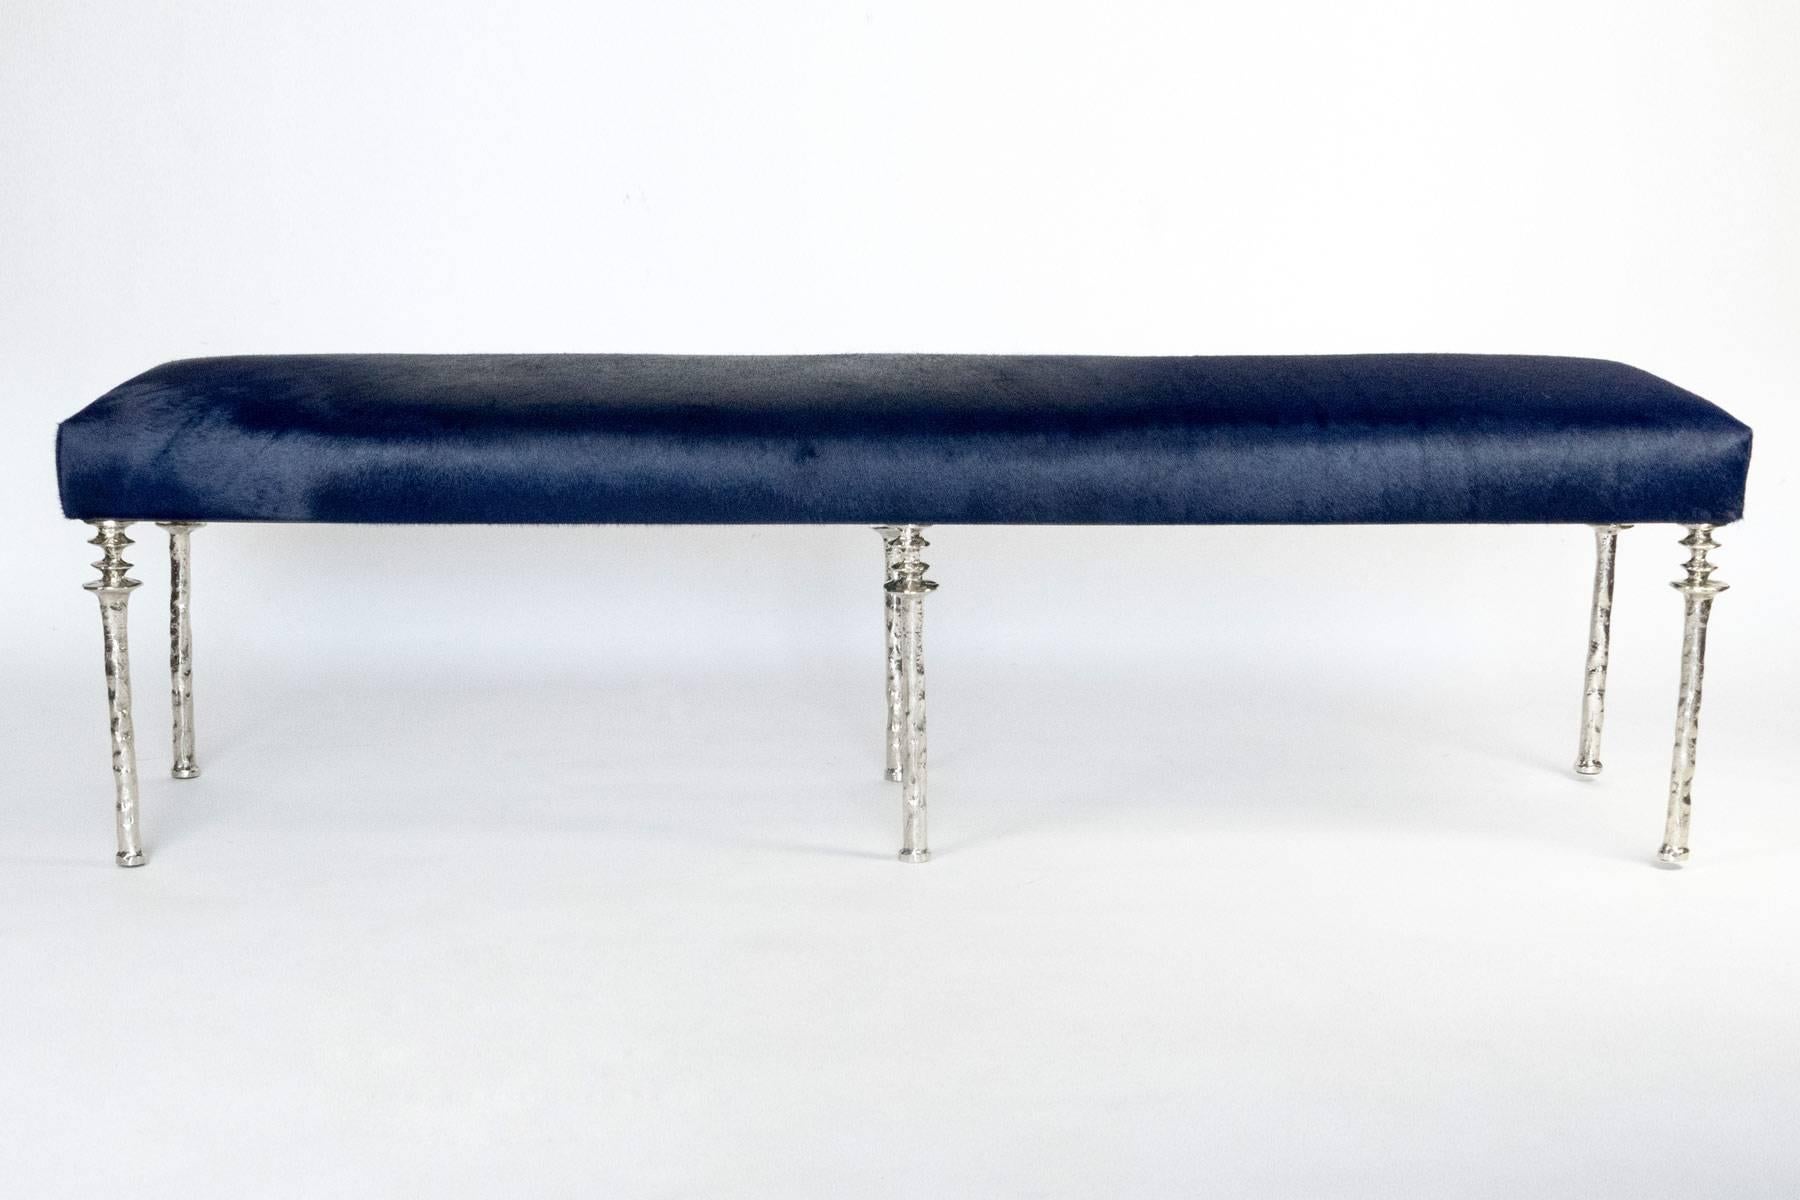 Inspired by Diego Giacometti, this bench are ideal for those who are looking for unique seating. Their cast bronze legs provide a truely organic touch. The
seat has been covered in a navy blue cow hide. This piece is in our showroom in the 1stdibs